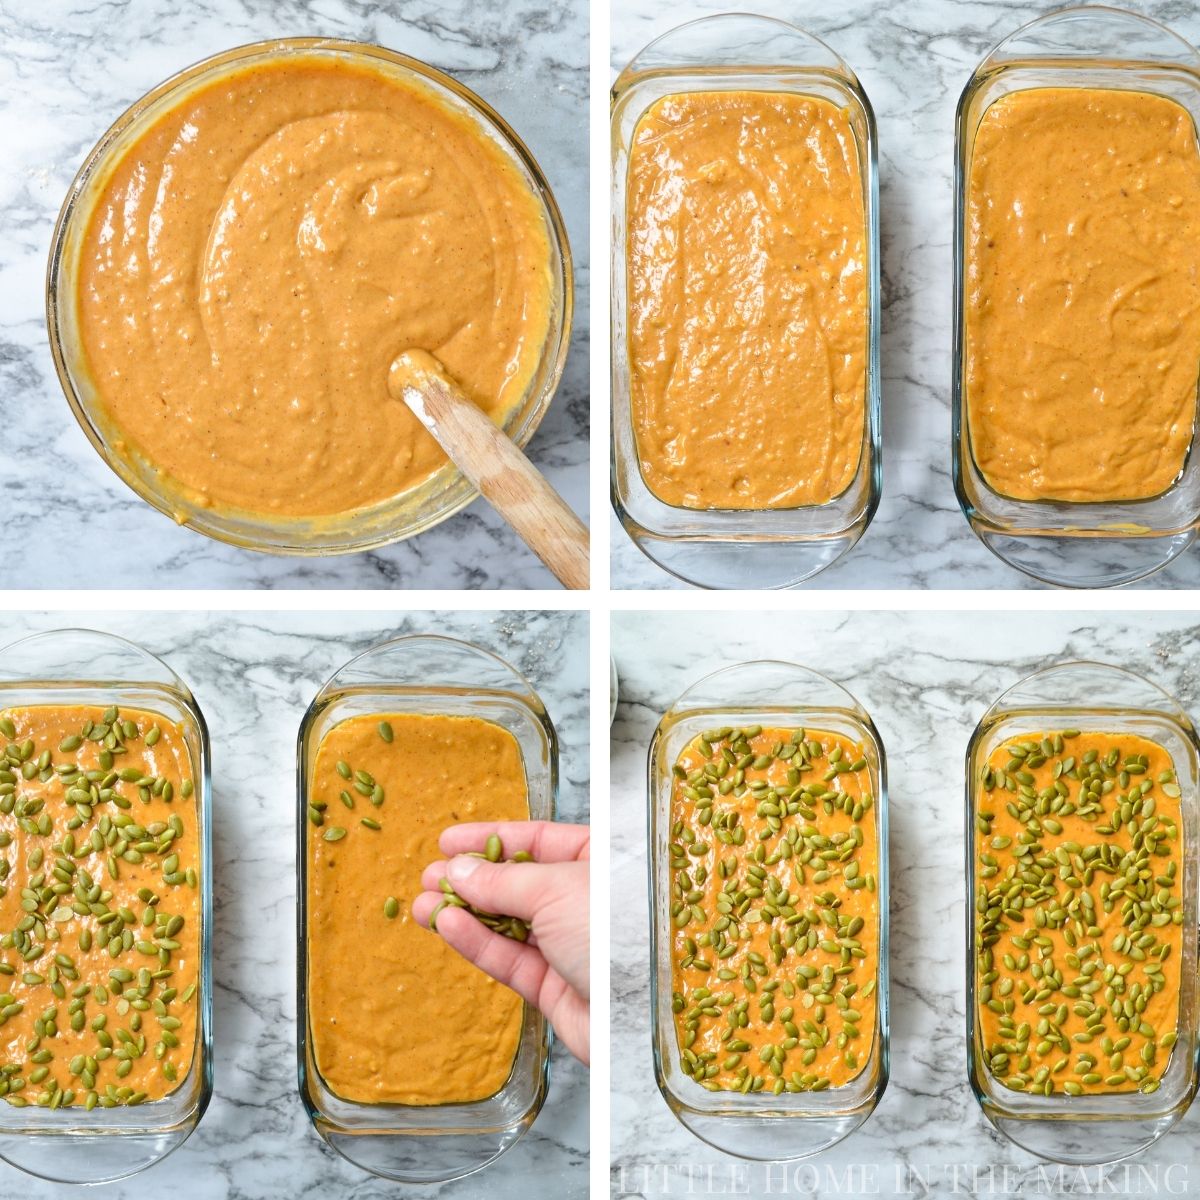 Pouring batter into loaf pans and sprinkling with pumpkin seeds.